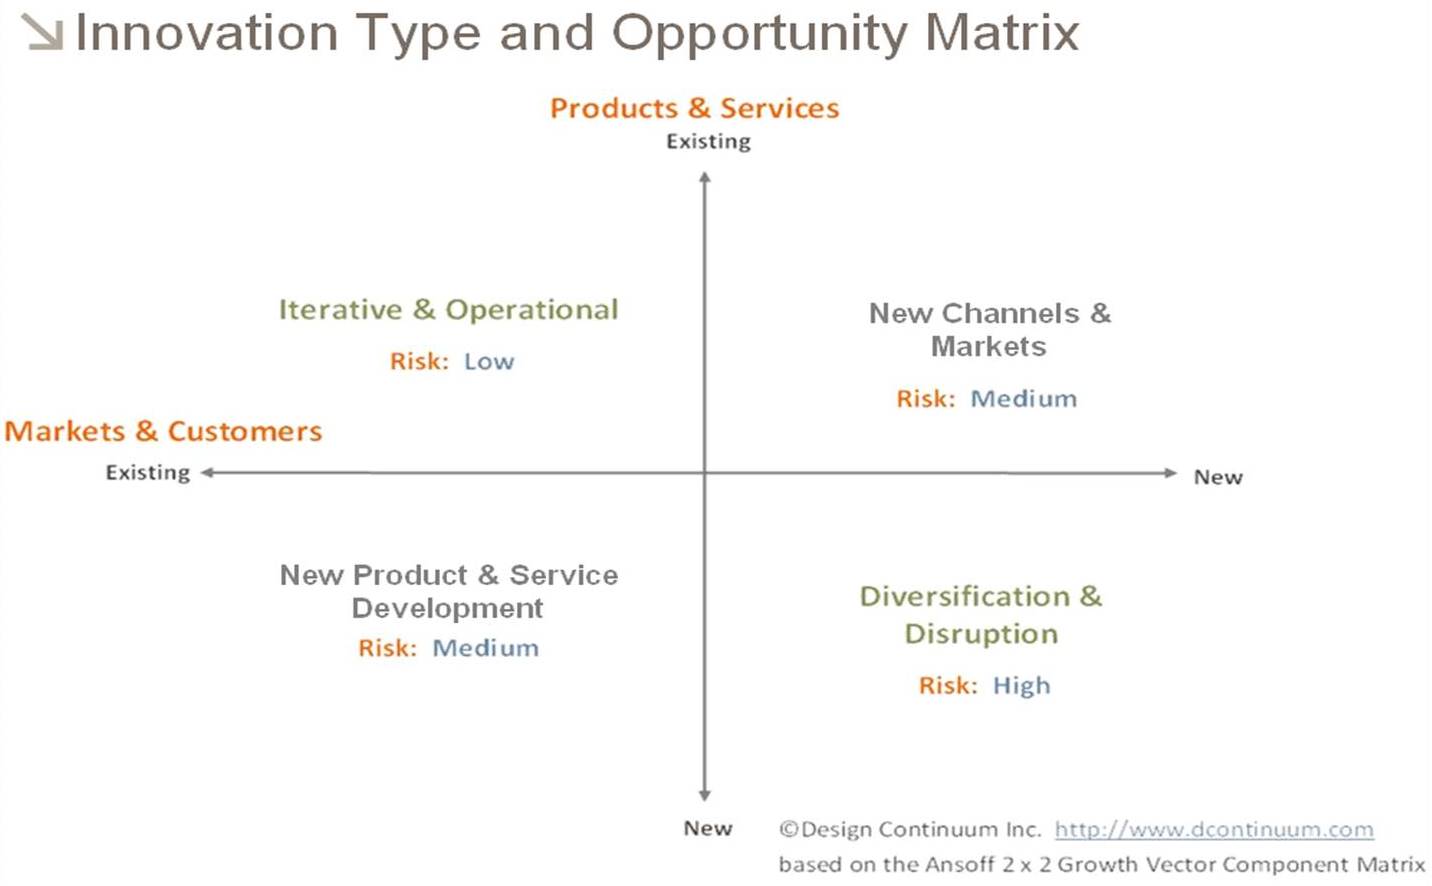 Innovation Type and Opportunity Matrix